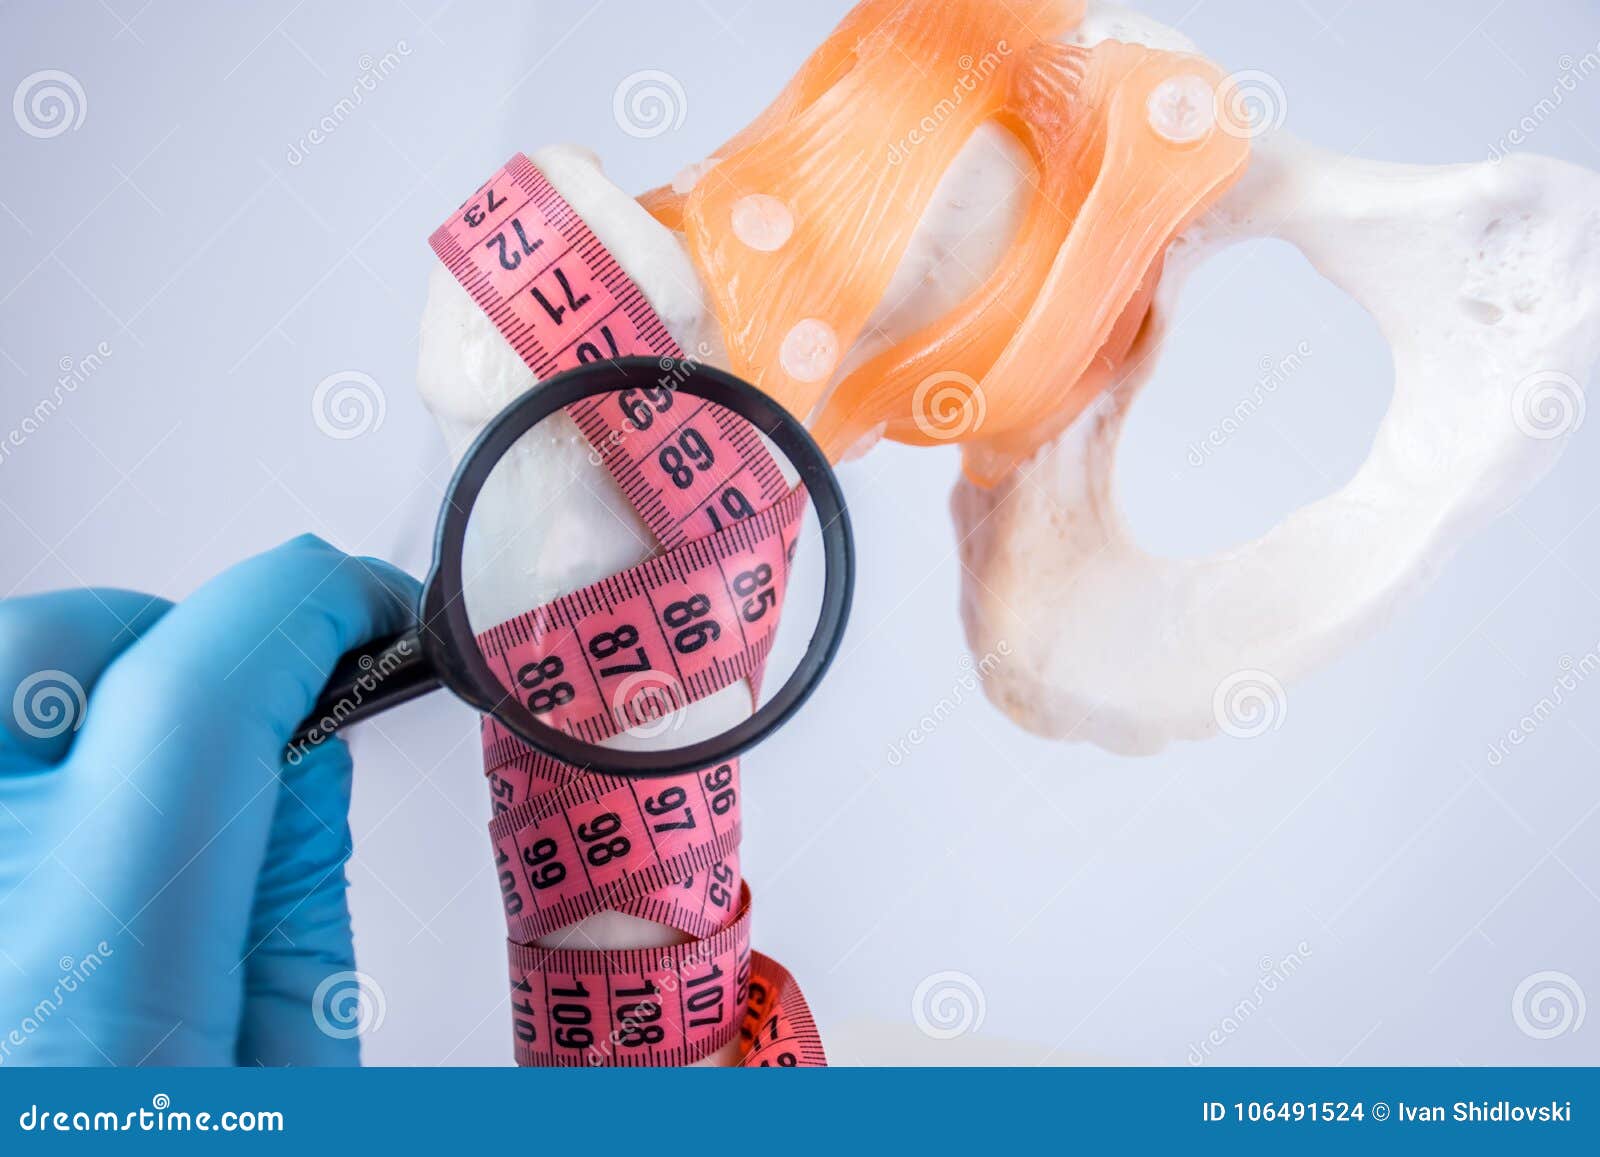 diagnosis of bone density and presence of osteoporosis photo idea. doctor examines through magnifying indicators measuring tape wr